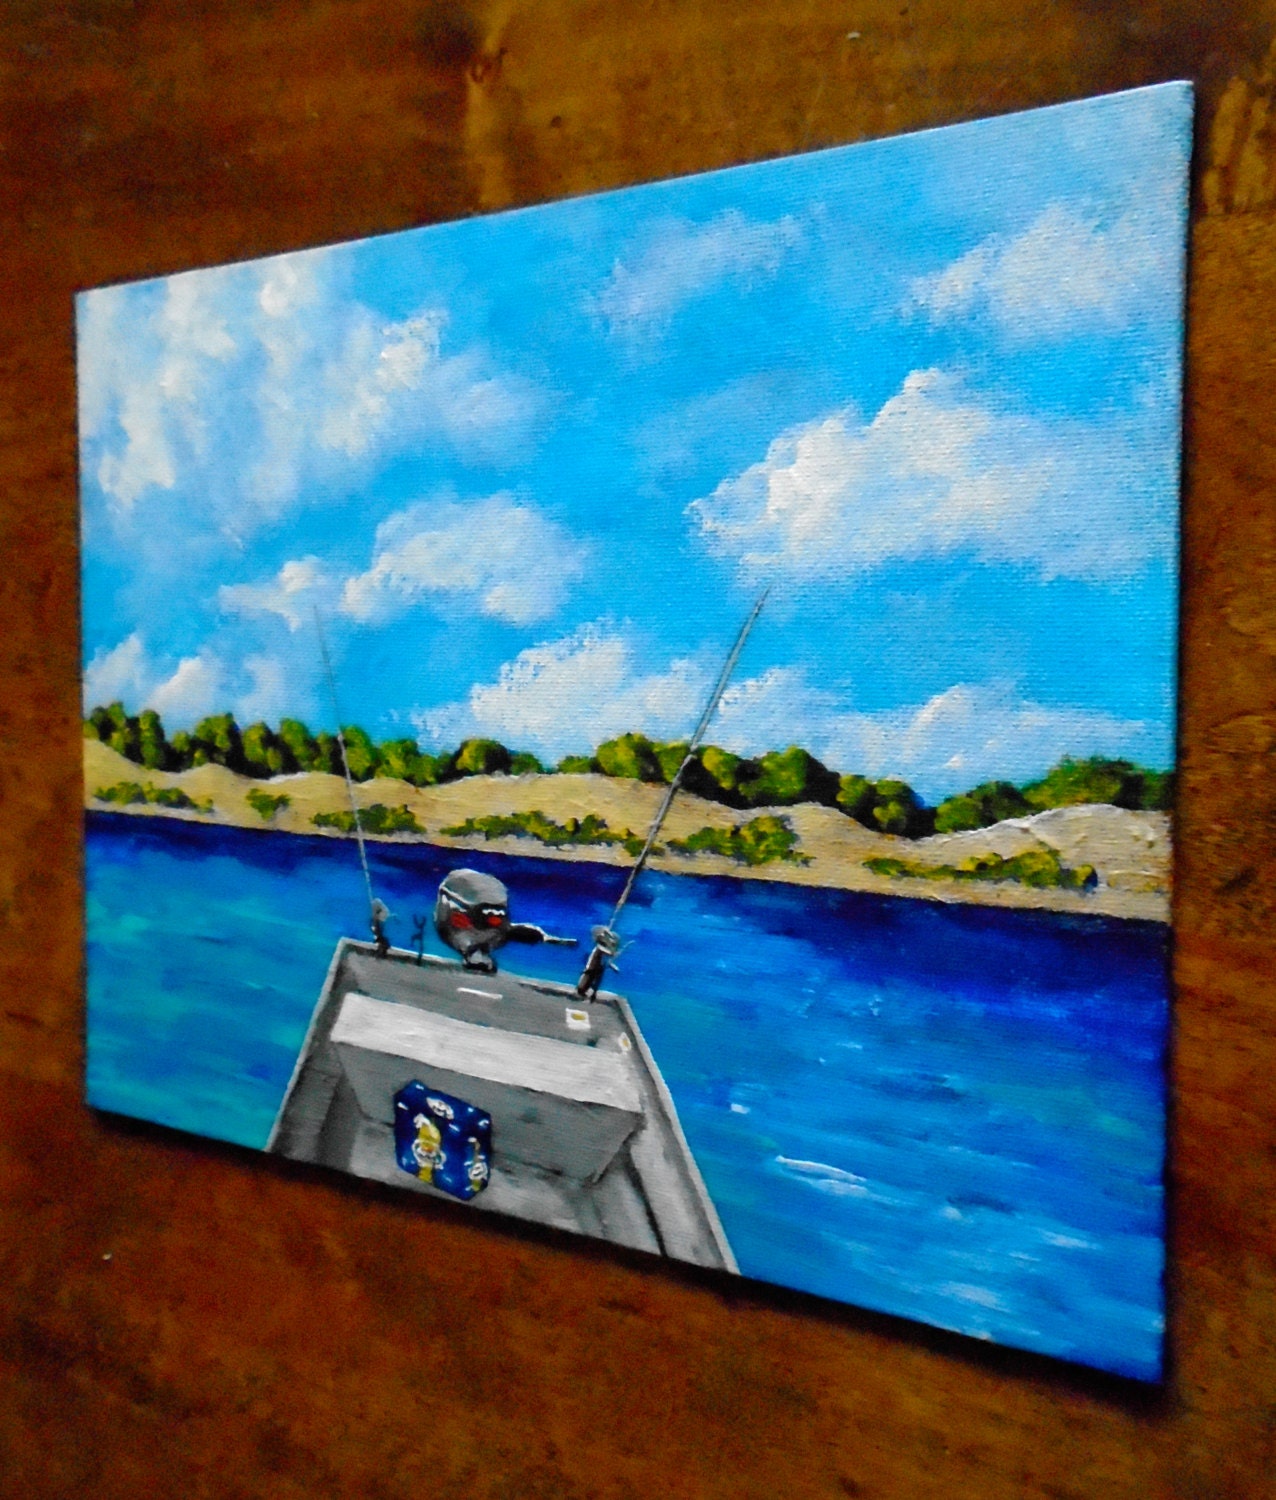 Gone Fishin' ORIGINAL ACRYLIC PAINTING 8 X 10 by Mike Kraus Seascape Beach  Lures Rods Tackle Boats Bait Angling Catch Release Reels 